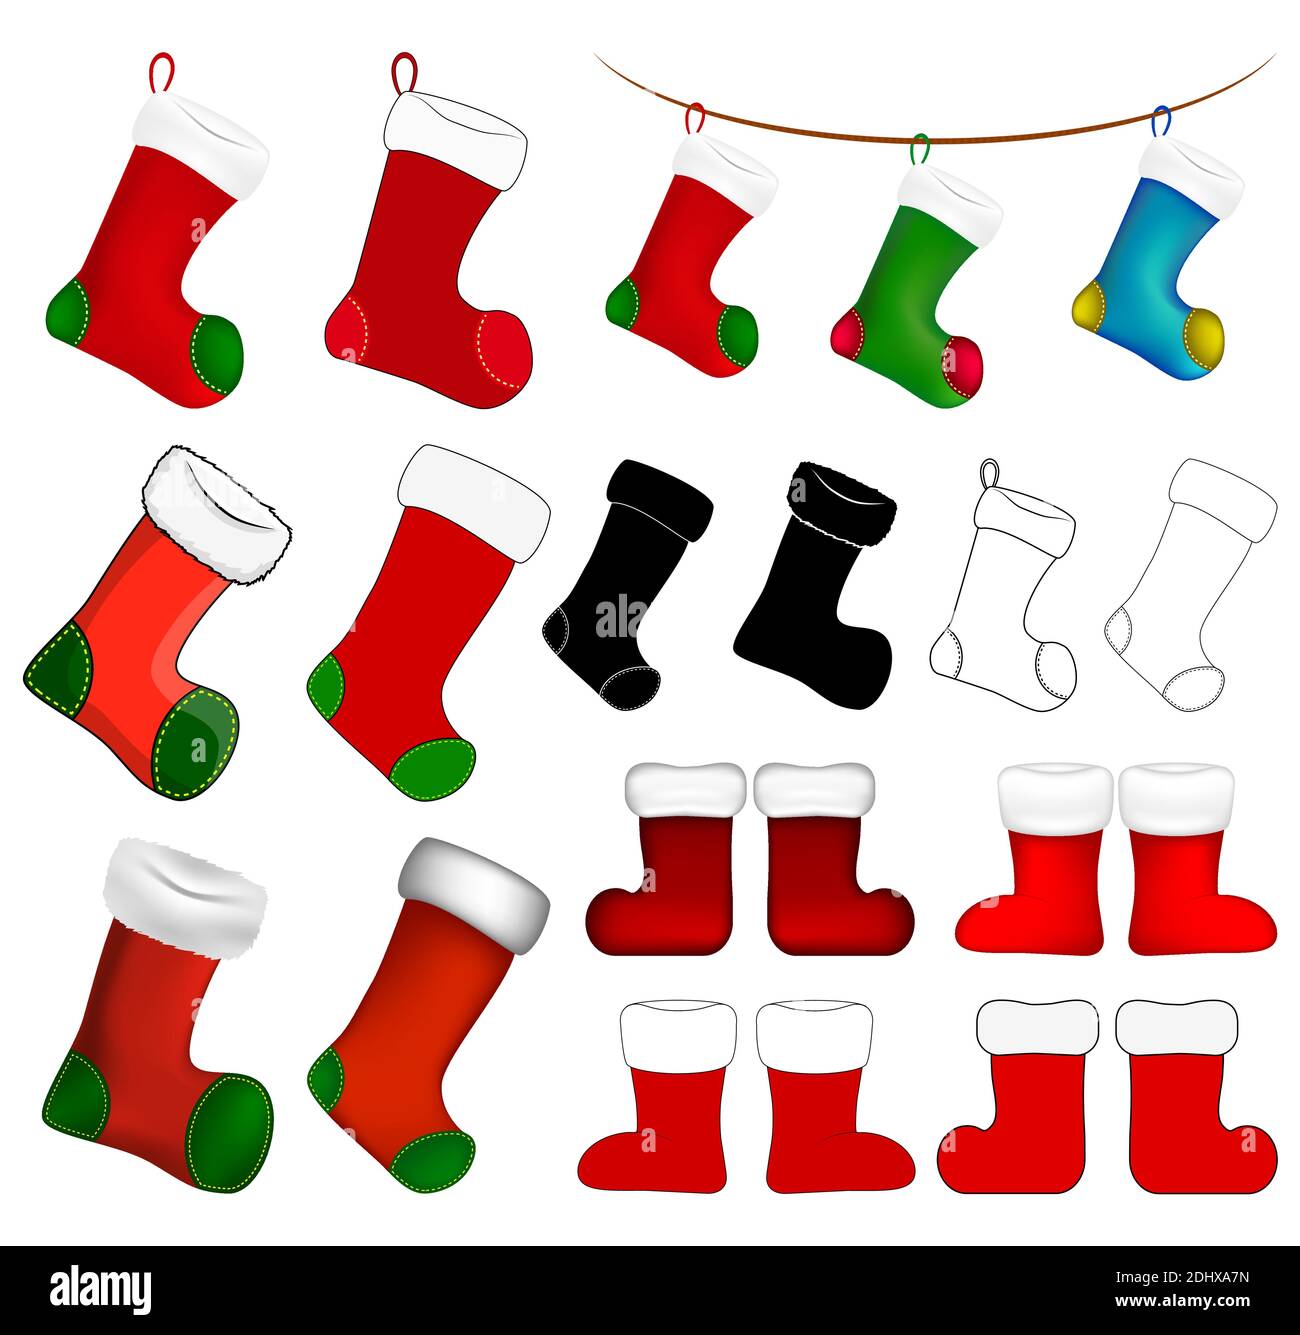 Empty christmas sock icon set. Cartoon stocking symbol collection. Winter holiday decoration. Vector illustration isolated on white background. Stock Vector